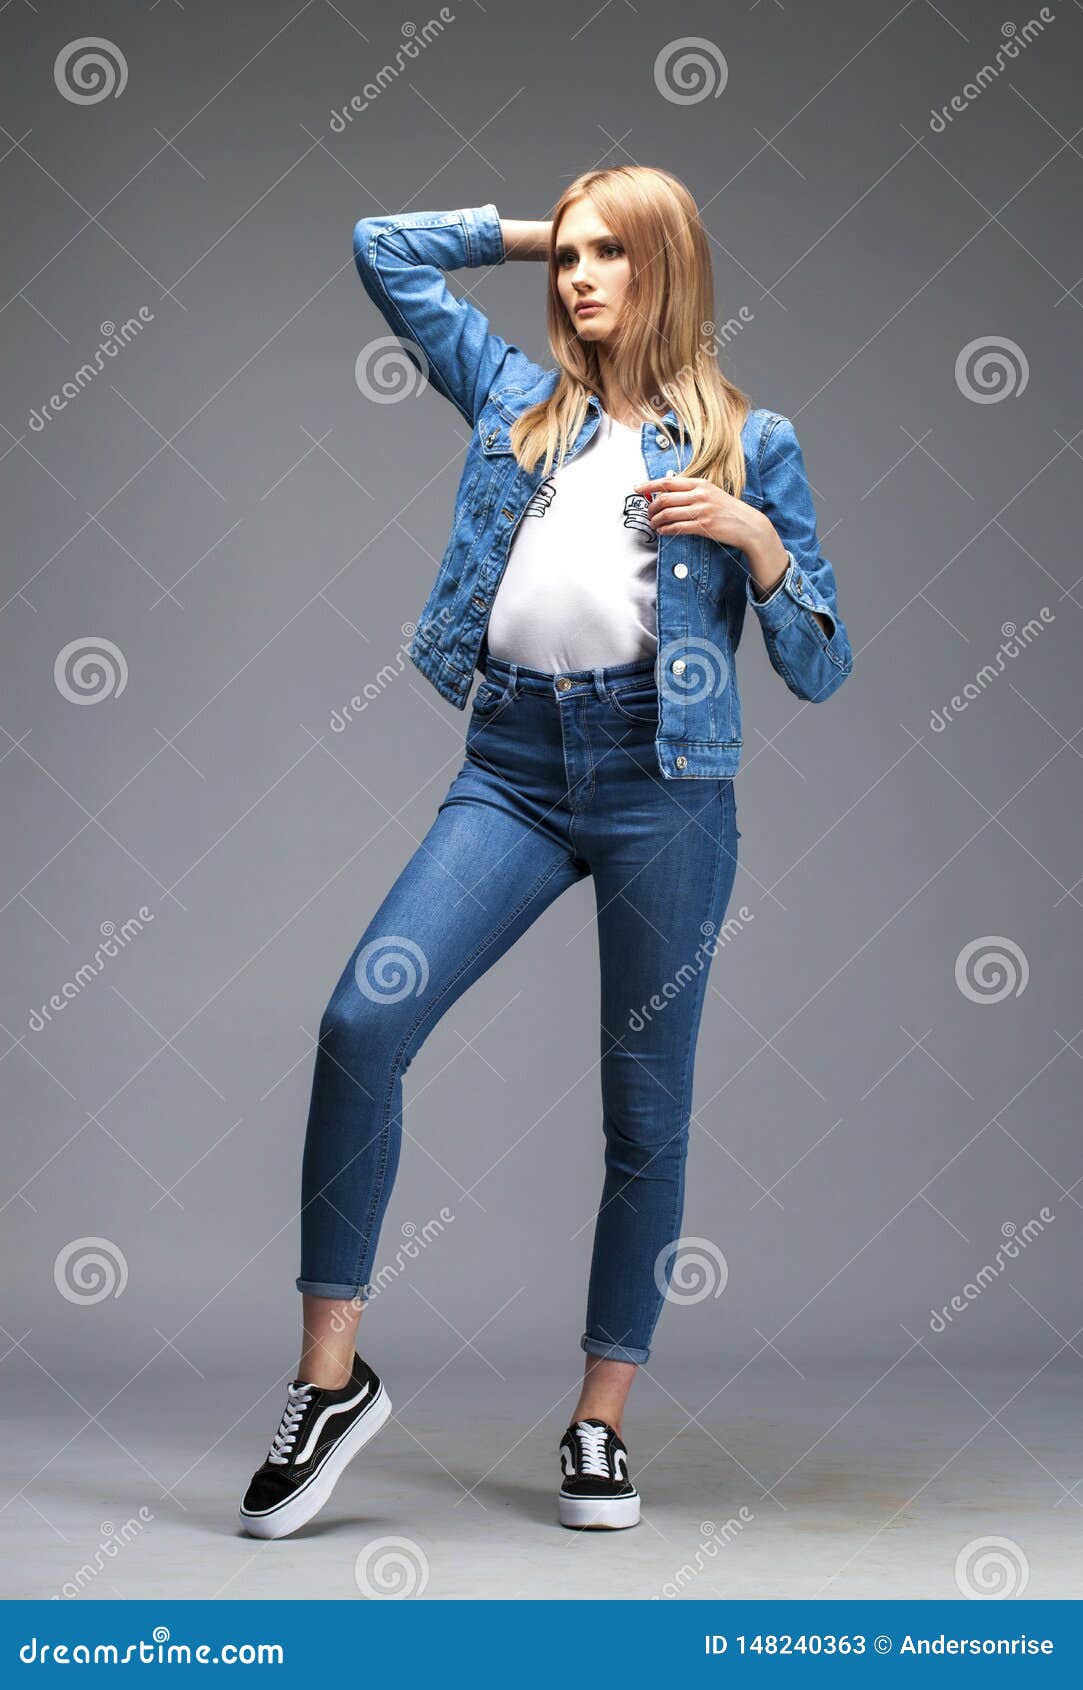 Beautiful Blonde Woman Dressed In A Denim Jacket And Blue Jeans Stock Image Image Of Denim